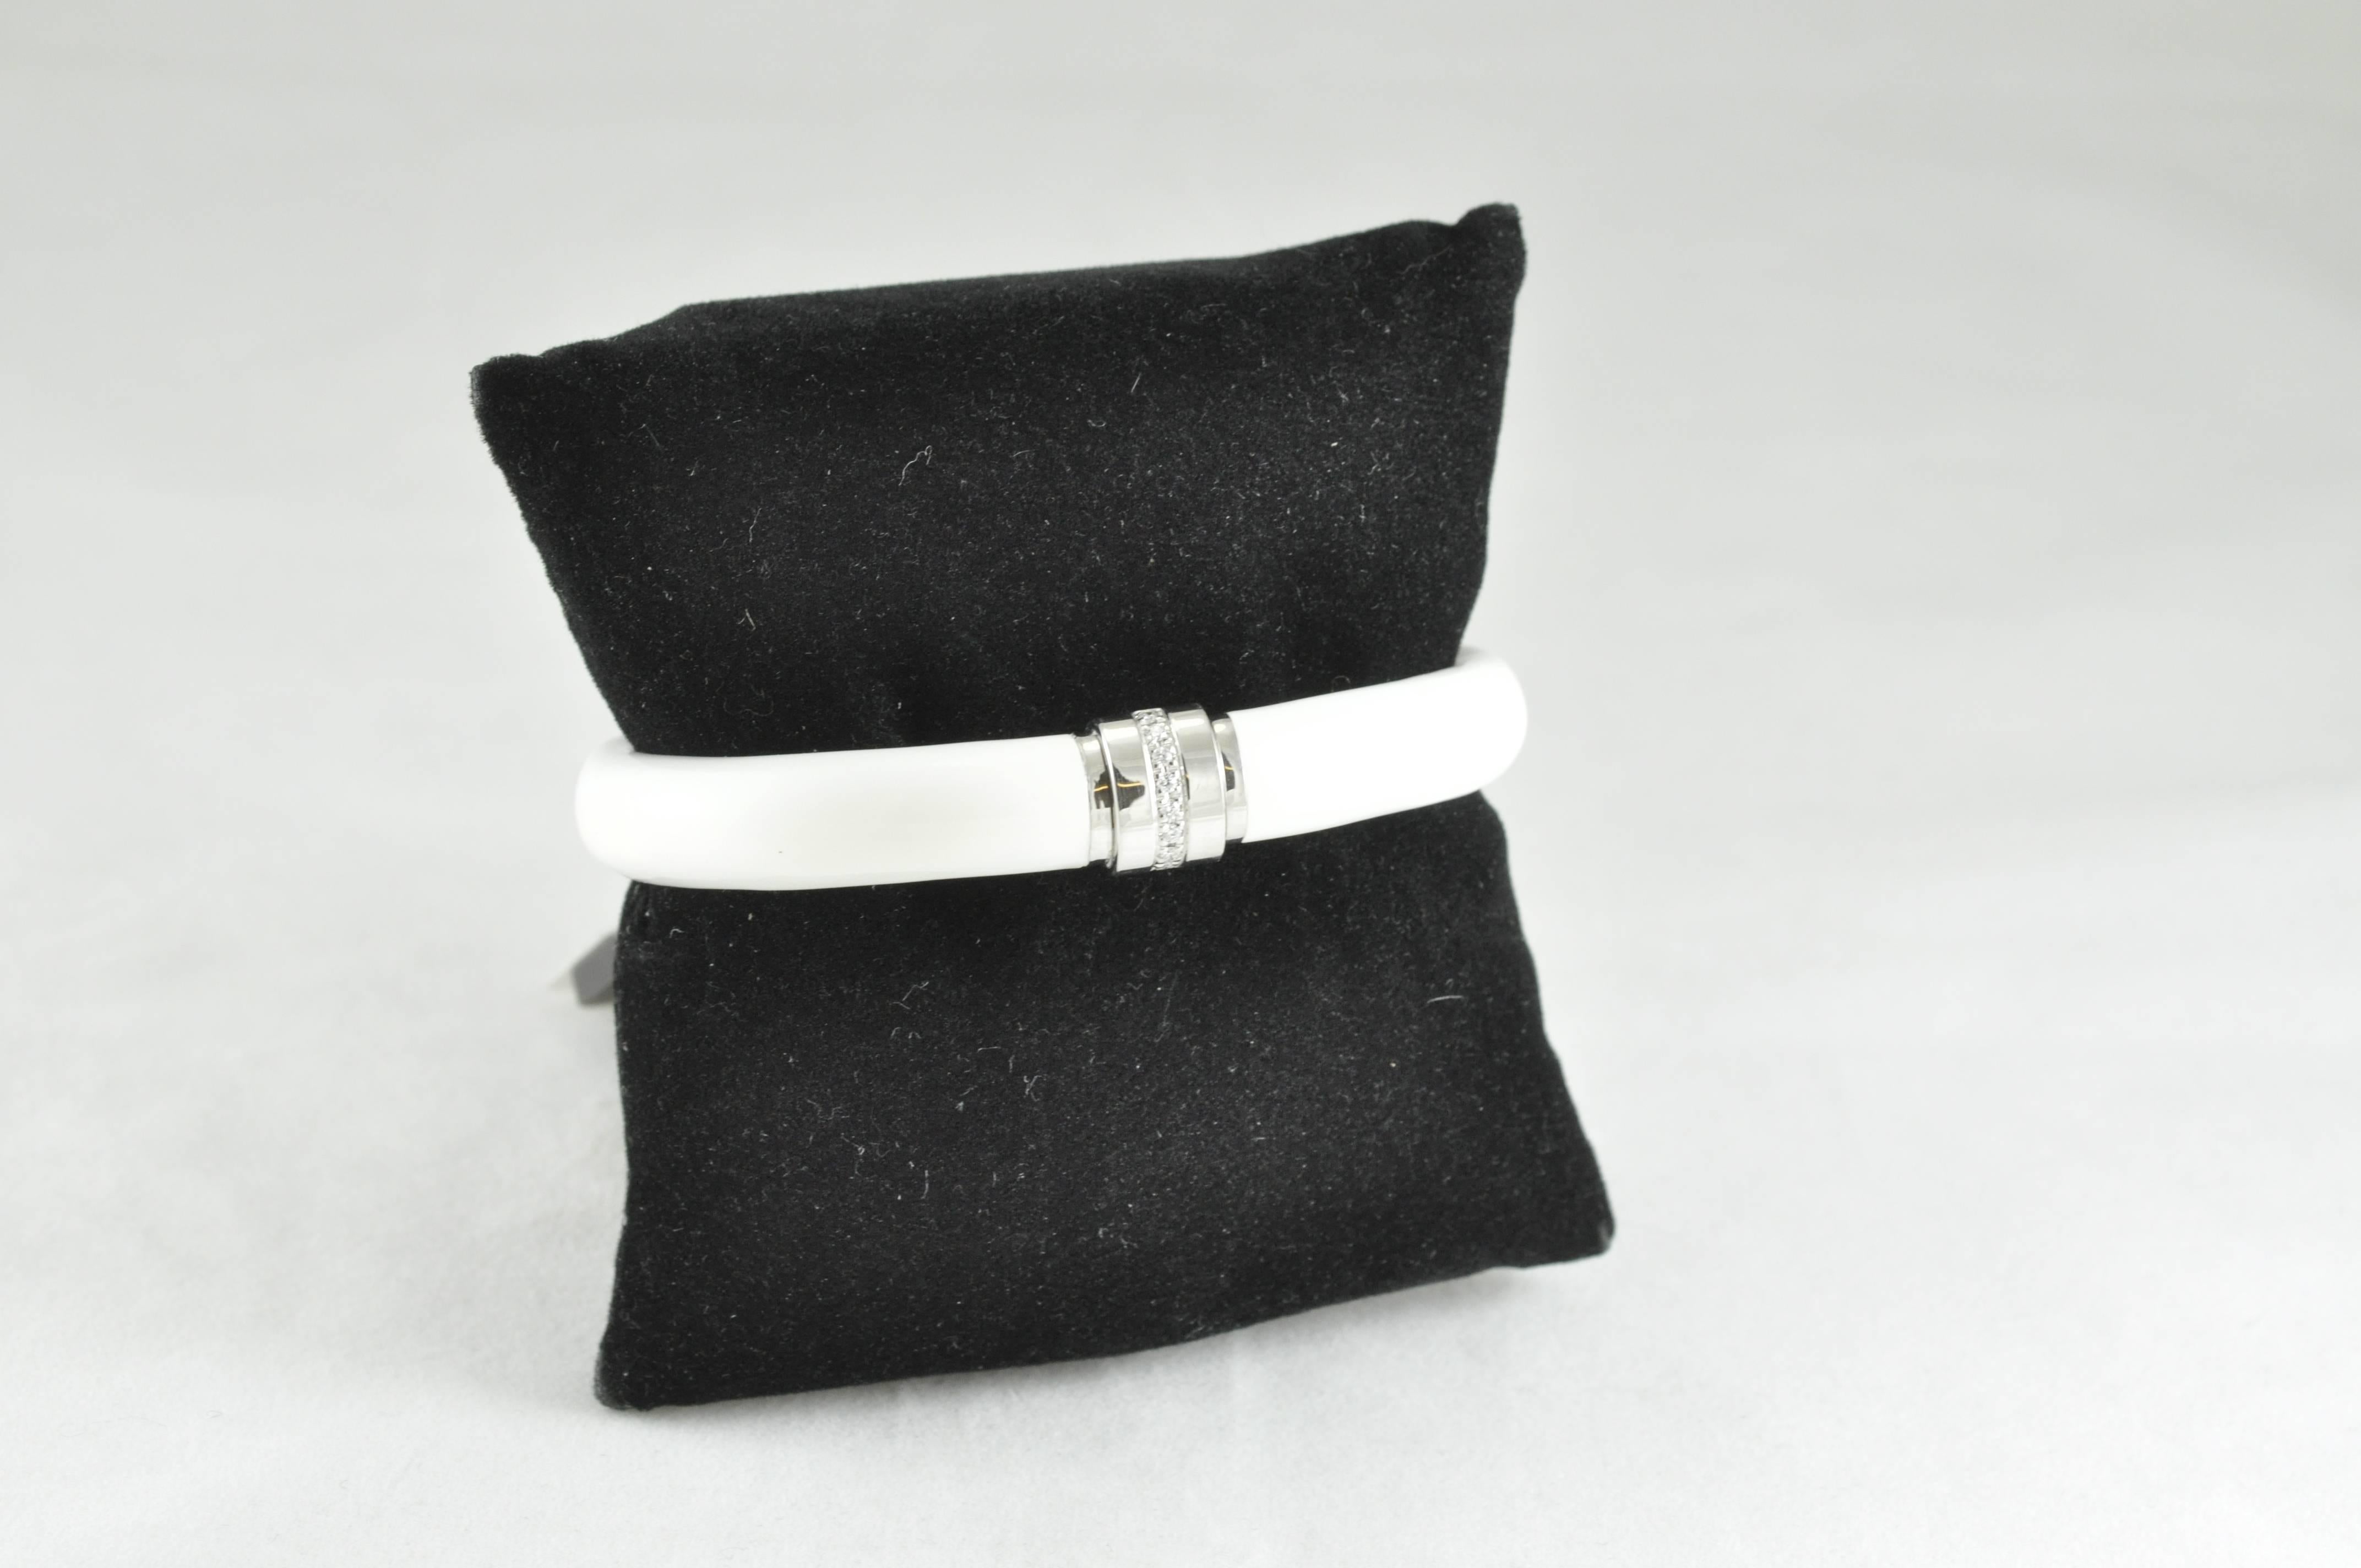 Designed by SOHO, this beautiful bracelet is made of Sterling silver, White enamel with 0.12ct of Diamonds. The bracelet is 9.5mm thick and looks lovely worn alone, or stacked with complimentary pieces. The bracelet is stamped SOHO as well as ITALY